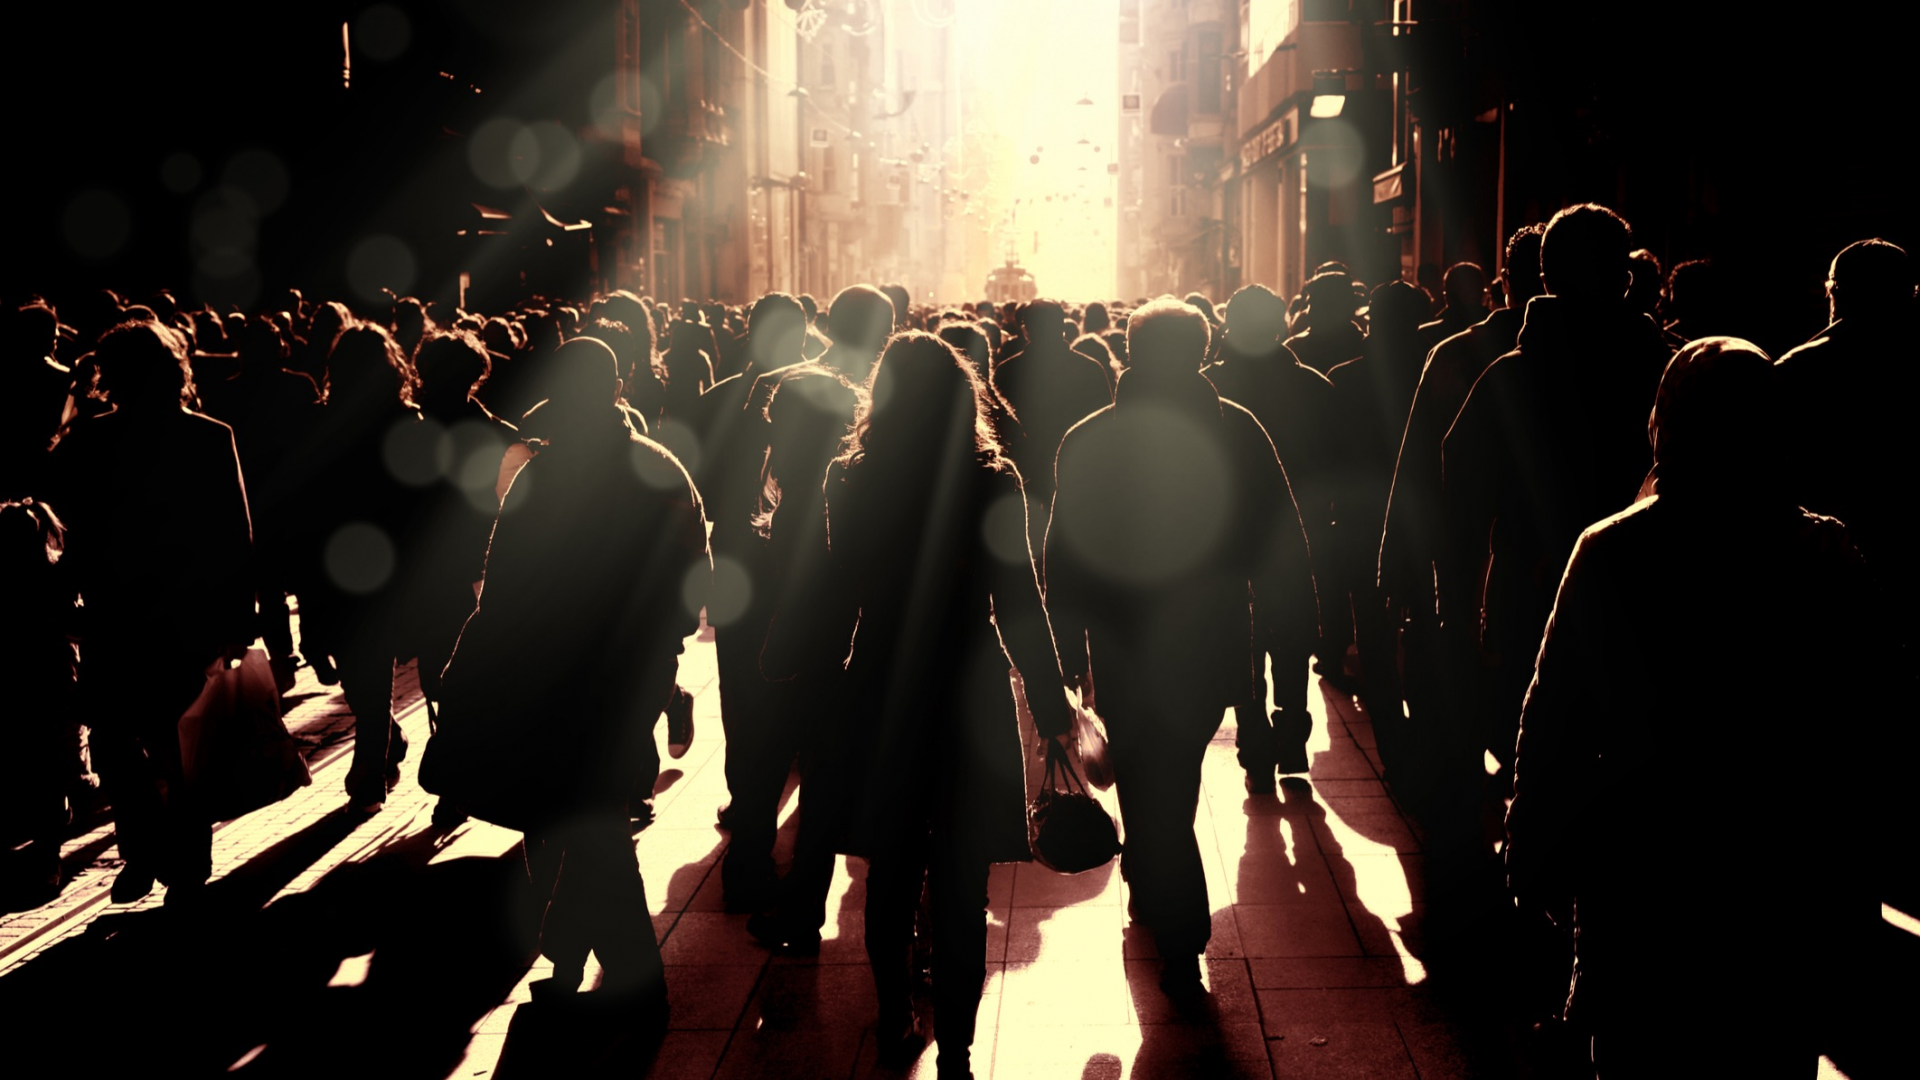 A crowd standing in a city street with light shining down on them, which also casts shadows across the crowd